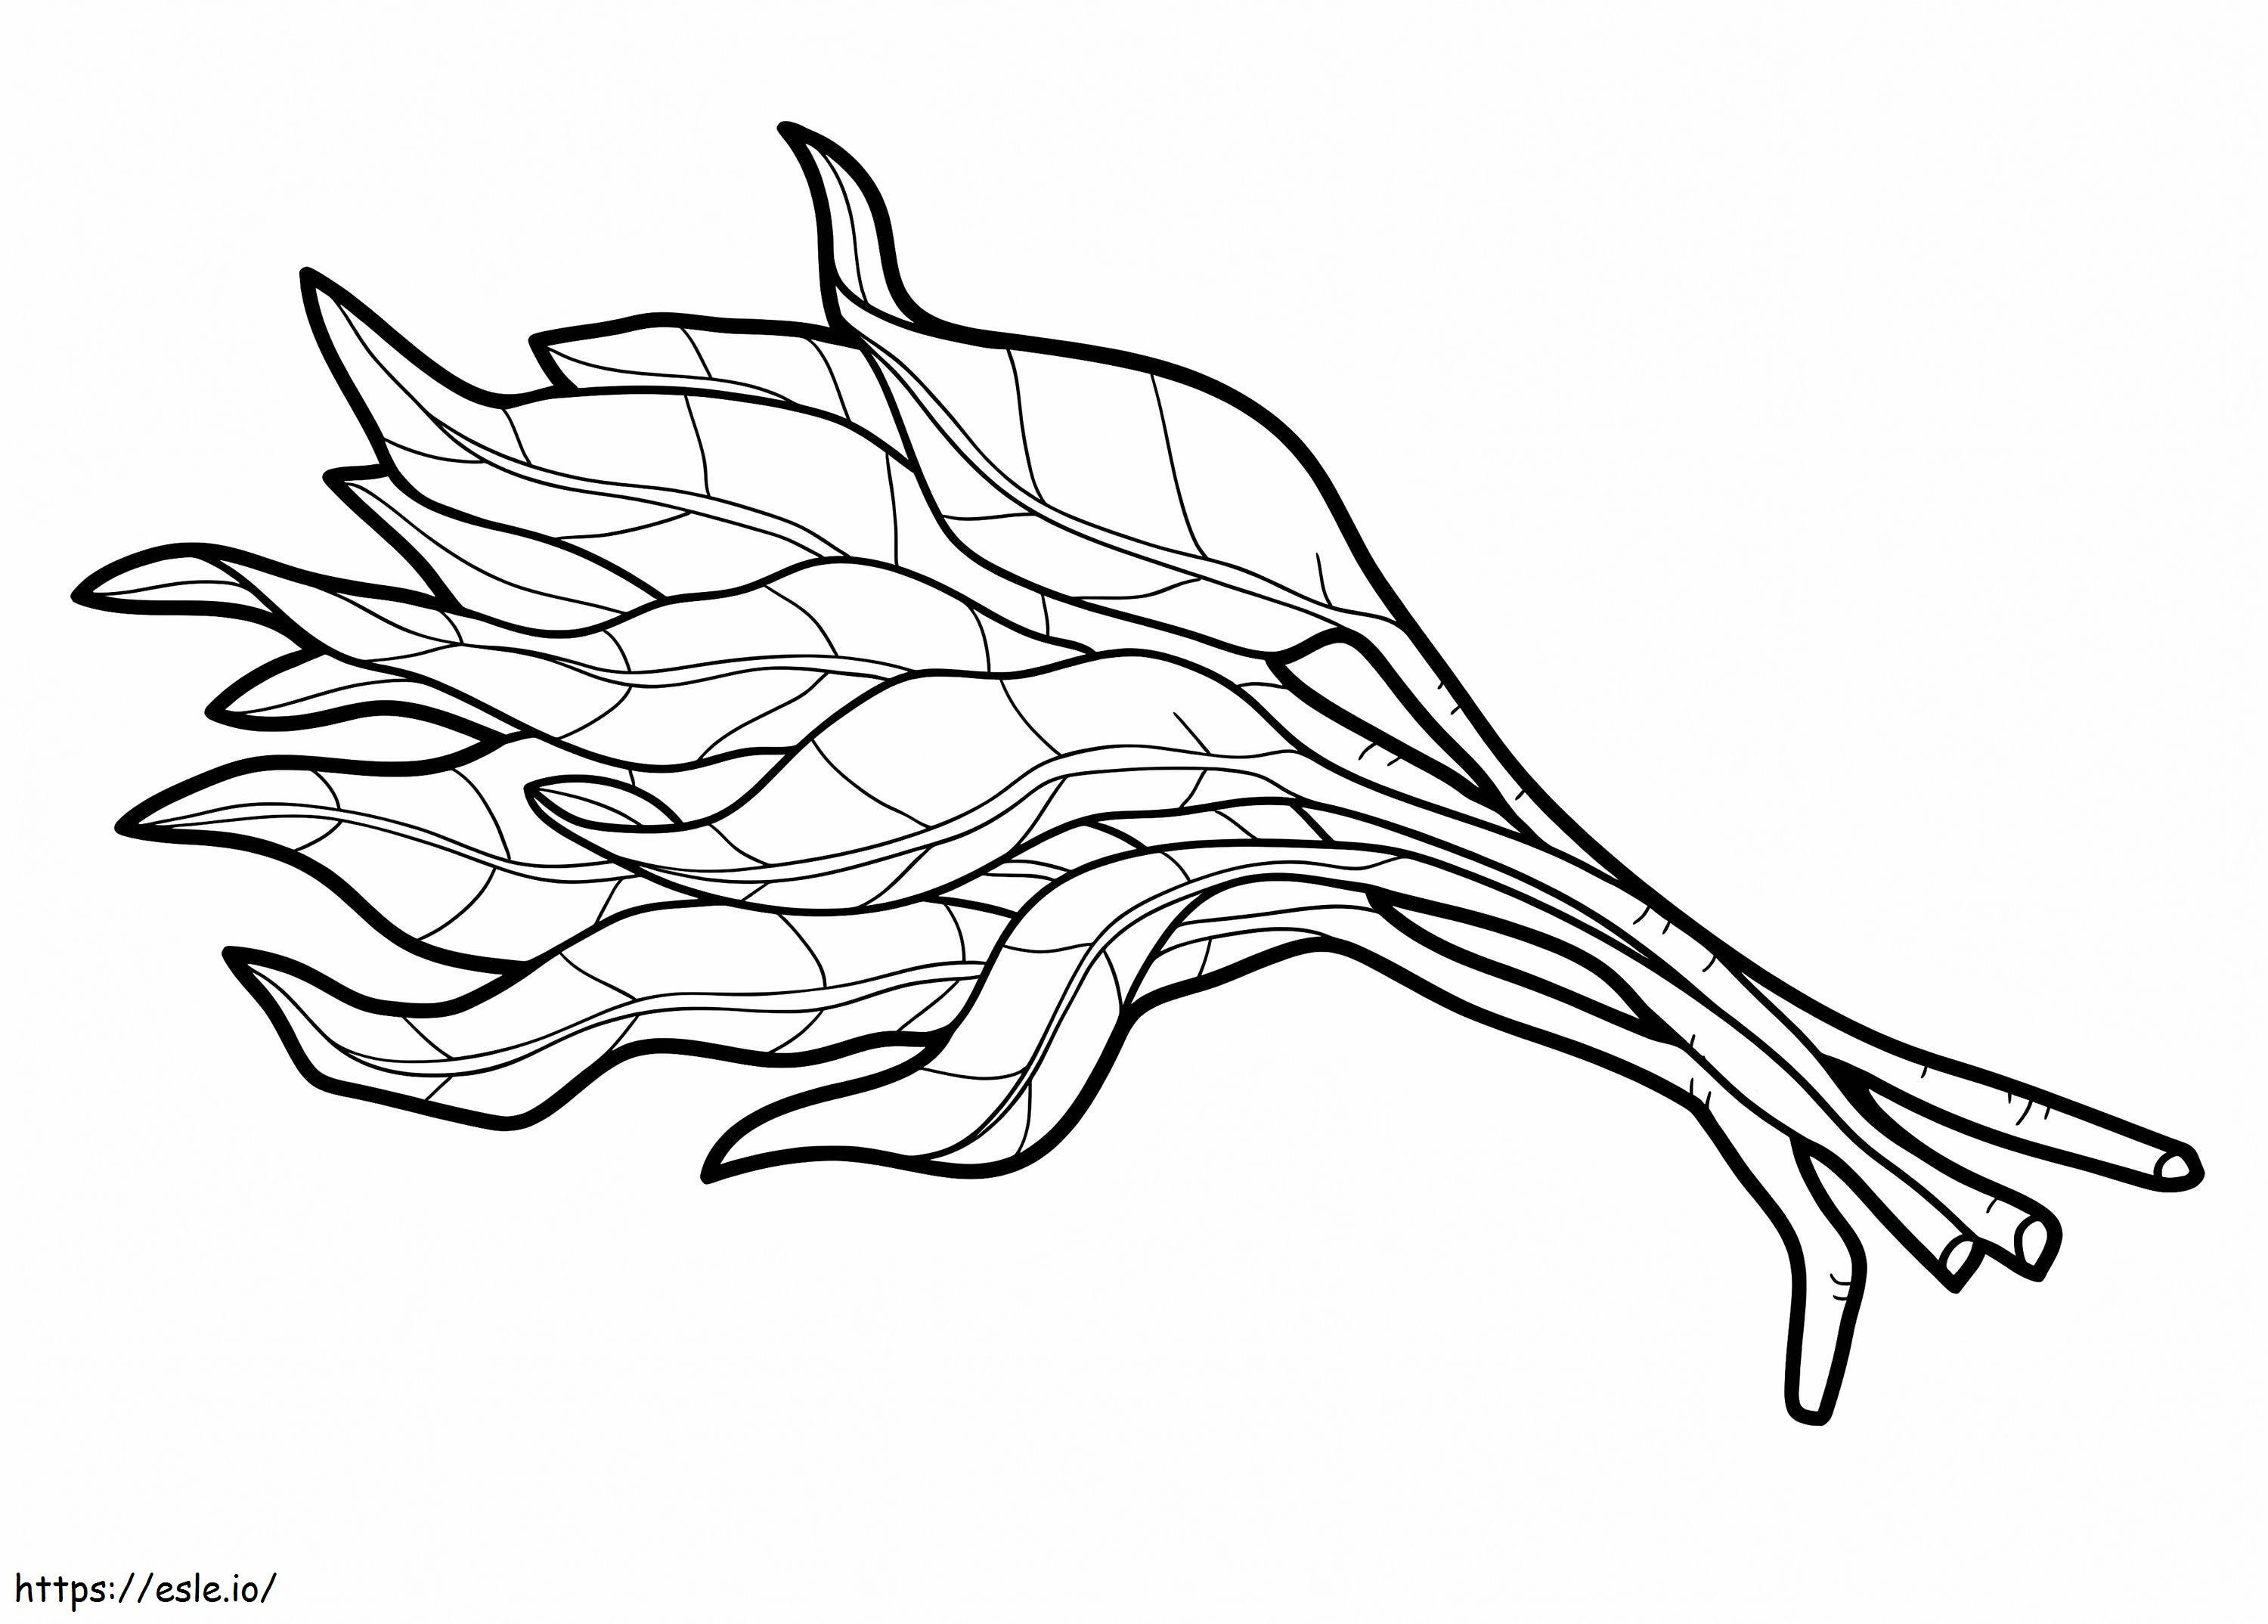 Spinach 2 coloring page